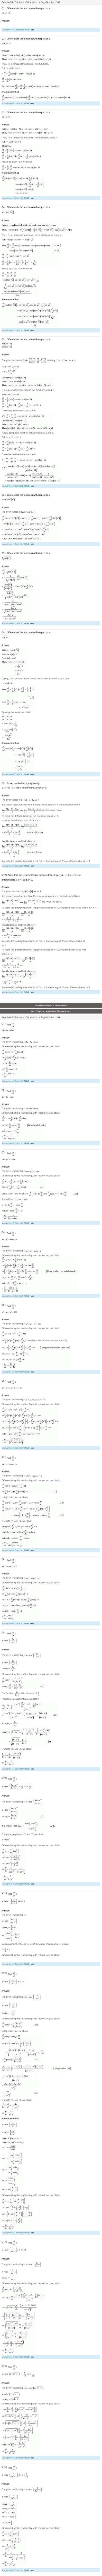 NCERT Solutions for Class 12 Maths Chapter 5 Continuity and Differentiability 3